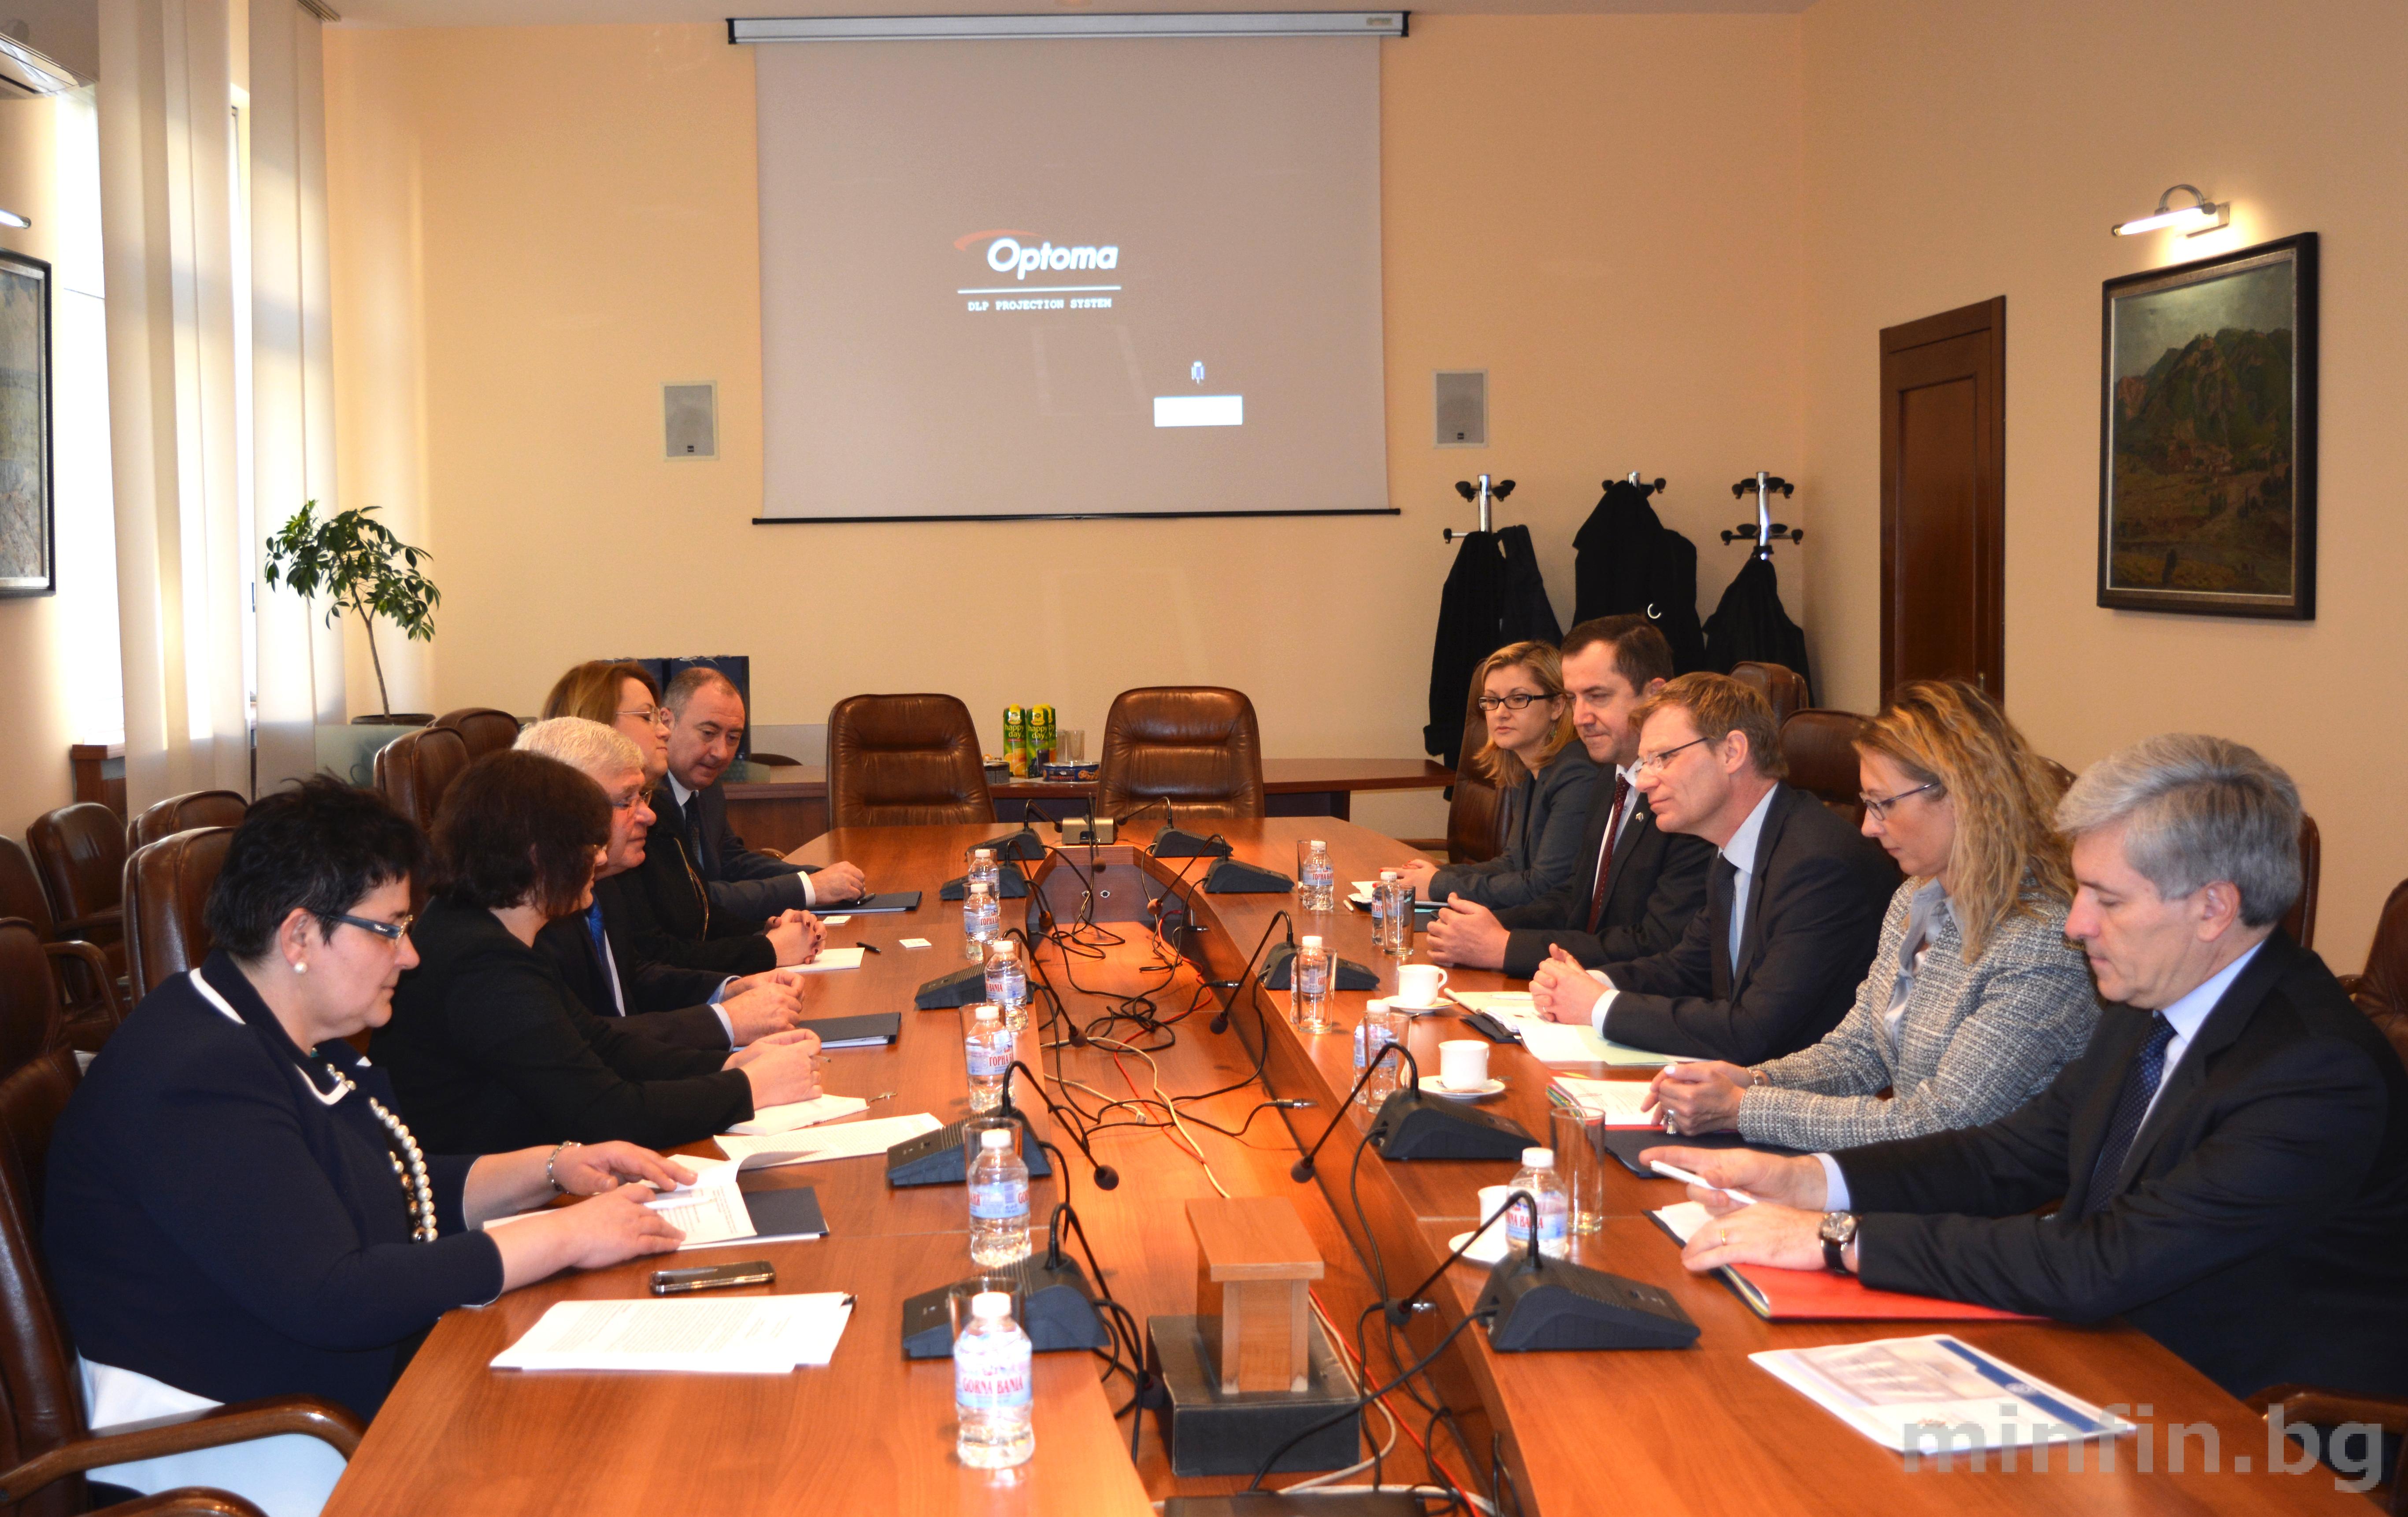 THE DIRECTOR-GENERAL OF THE TAXATION AND CUSTOMS UNION DIRECTORATE GENERAL (DG TAXUD) STEPHEN QUEST AND HIS TEAM ARE ON A WORKING VISIT TO BULGARIA IN CONNECTION WITH THE PREPARATION OF THE BULGARIAN PRESIDENCY OF THE COUNCIL OF THE EU IN 2018